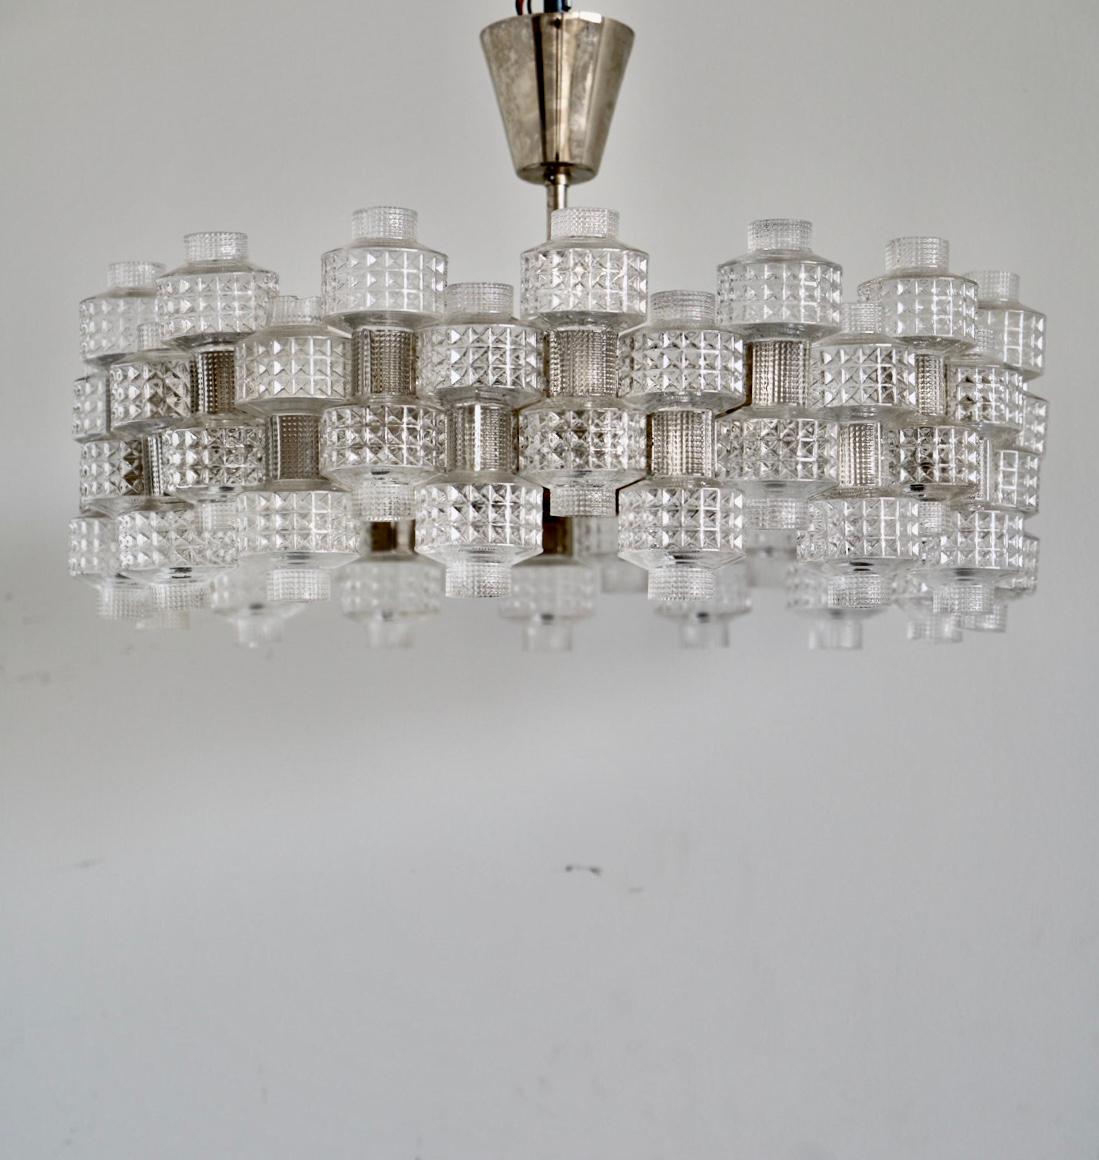 A chandeliers model festival designed by Gert Nyström, Circa 1950s.
Glass parts by Orrefors. Early production with metal clips. 6 E27 Sockets.
Existing wires, rewiring available upon request.